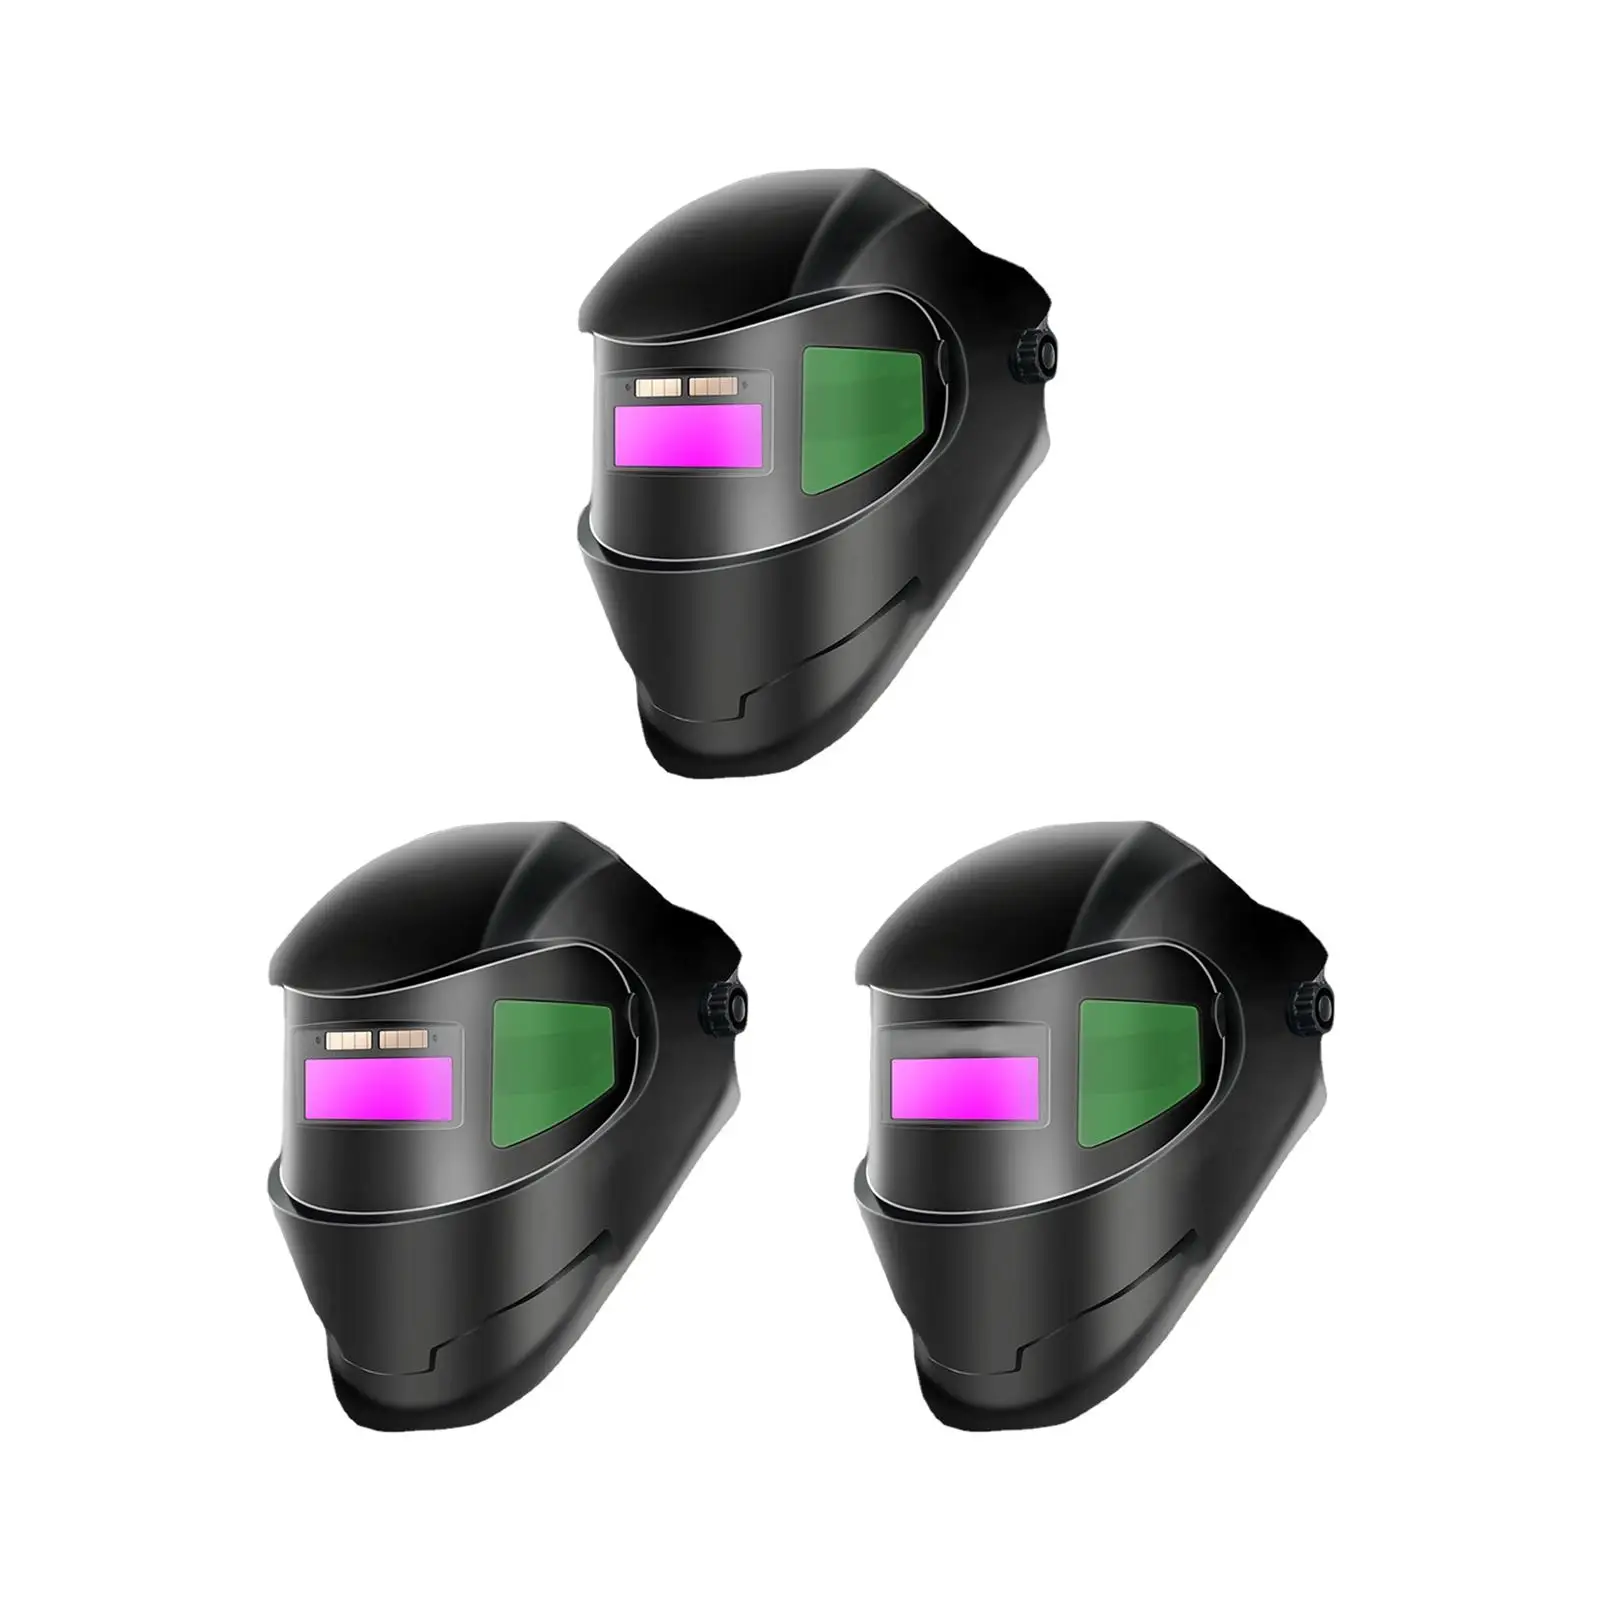 Flip up Welding Face Cover Breathable Large Viewing Screen Solar Power Auto Darkening Welding Helmets for Grinding TIG Mig Weld